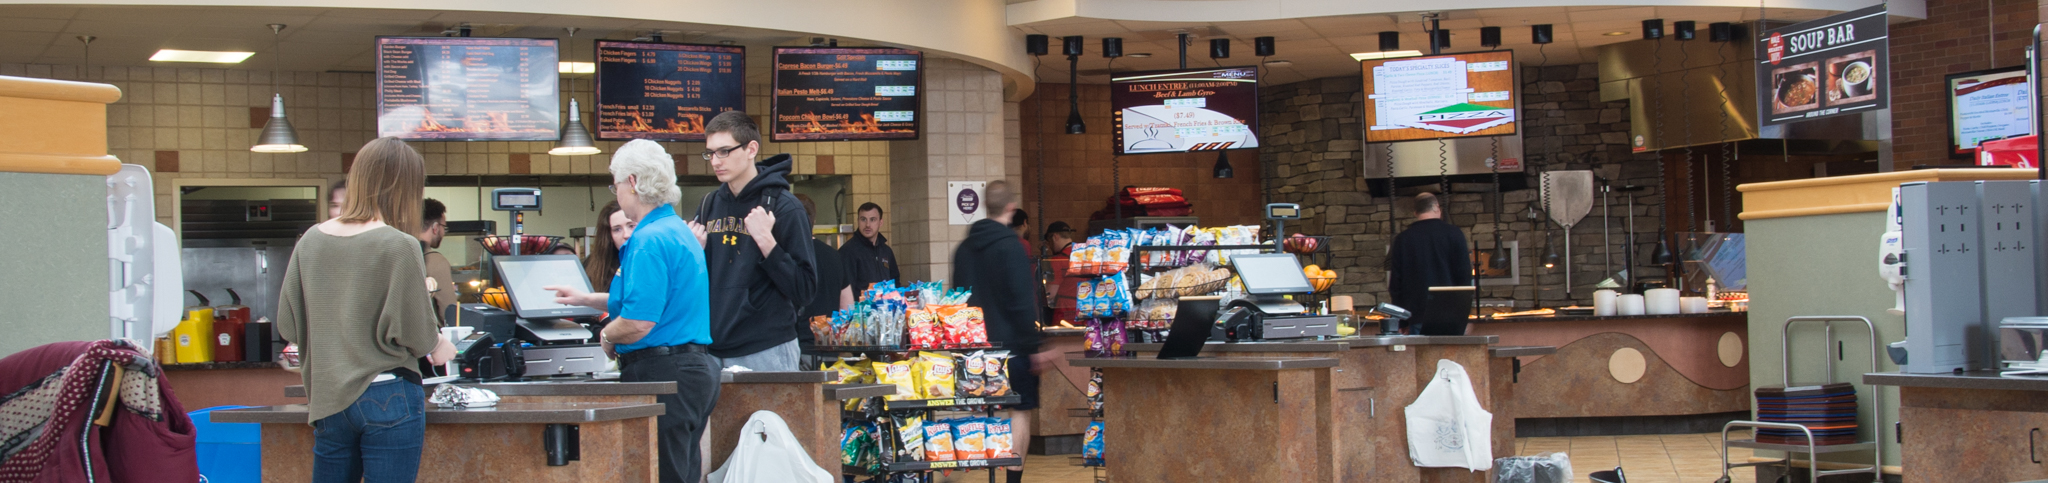 cashier at desk with stations of food in background